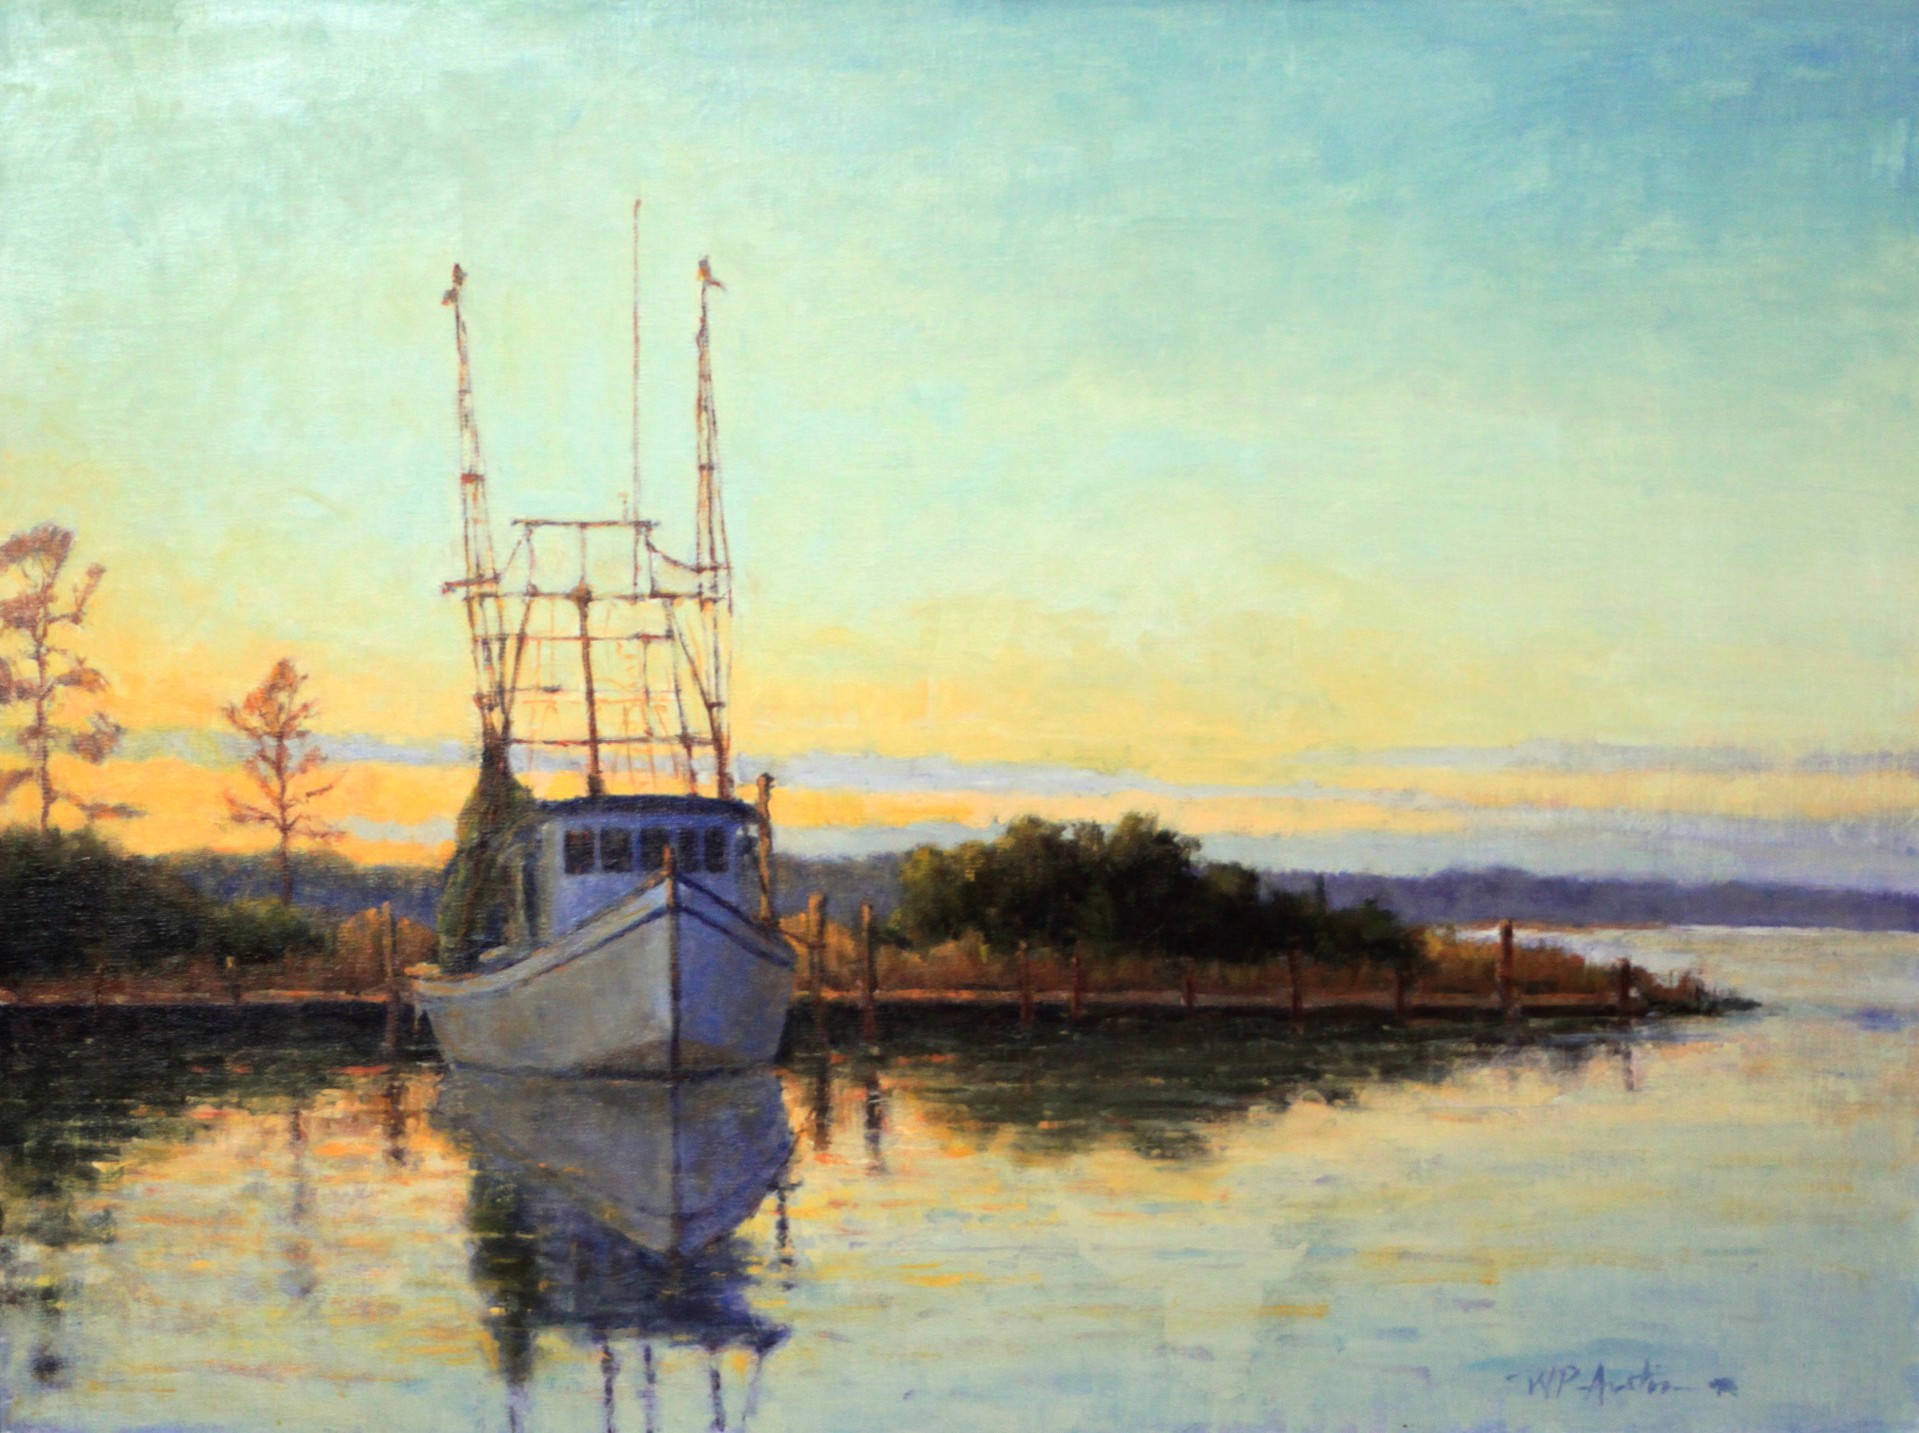 Apalach at Rest by Perry Austin